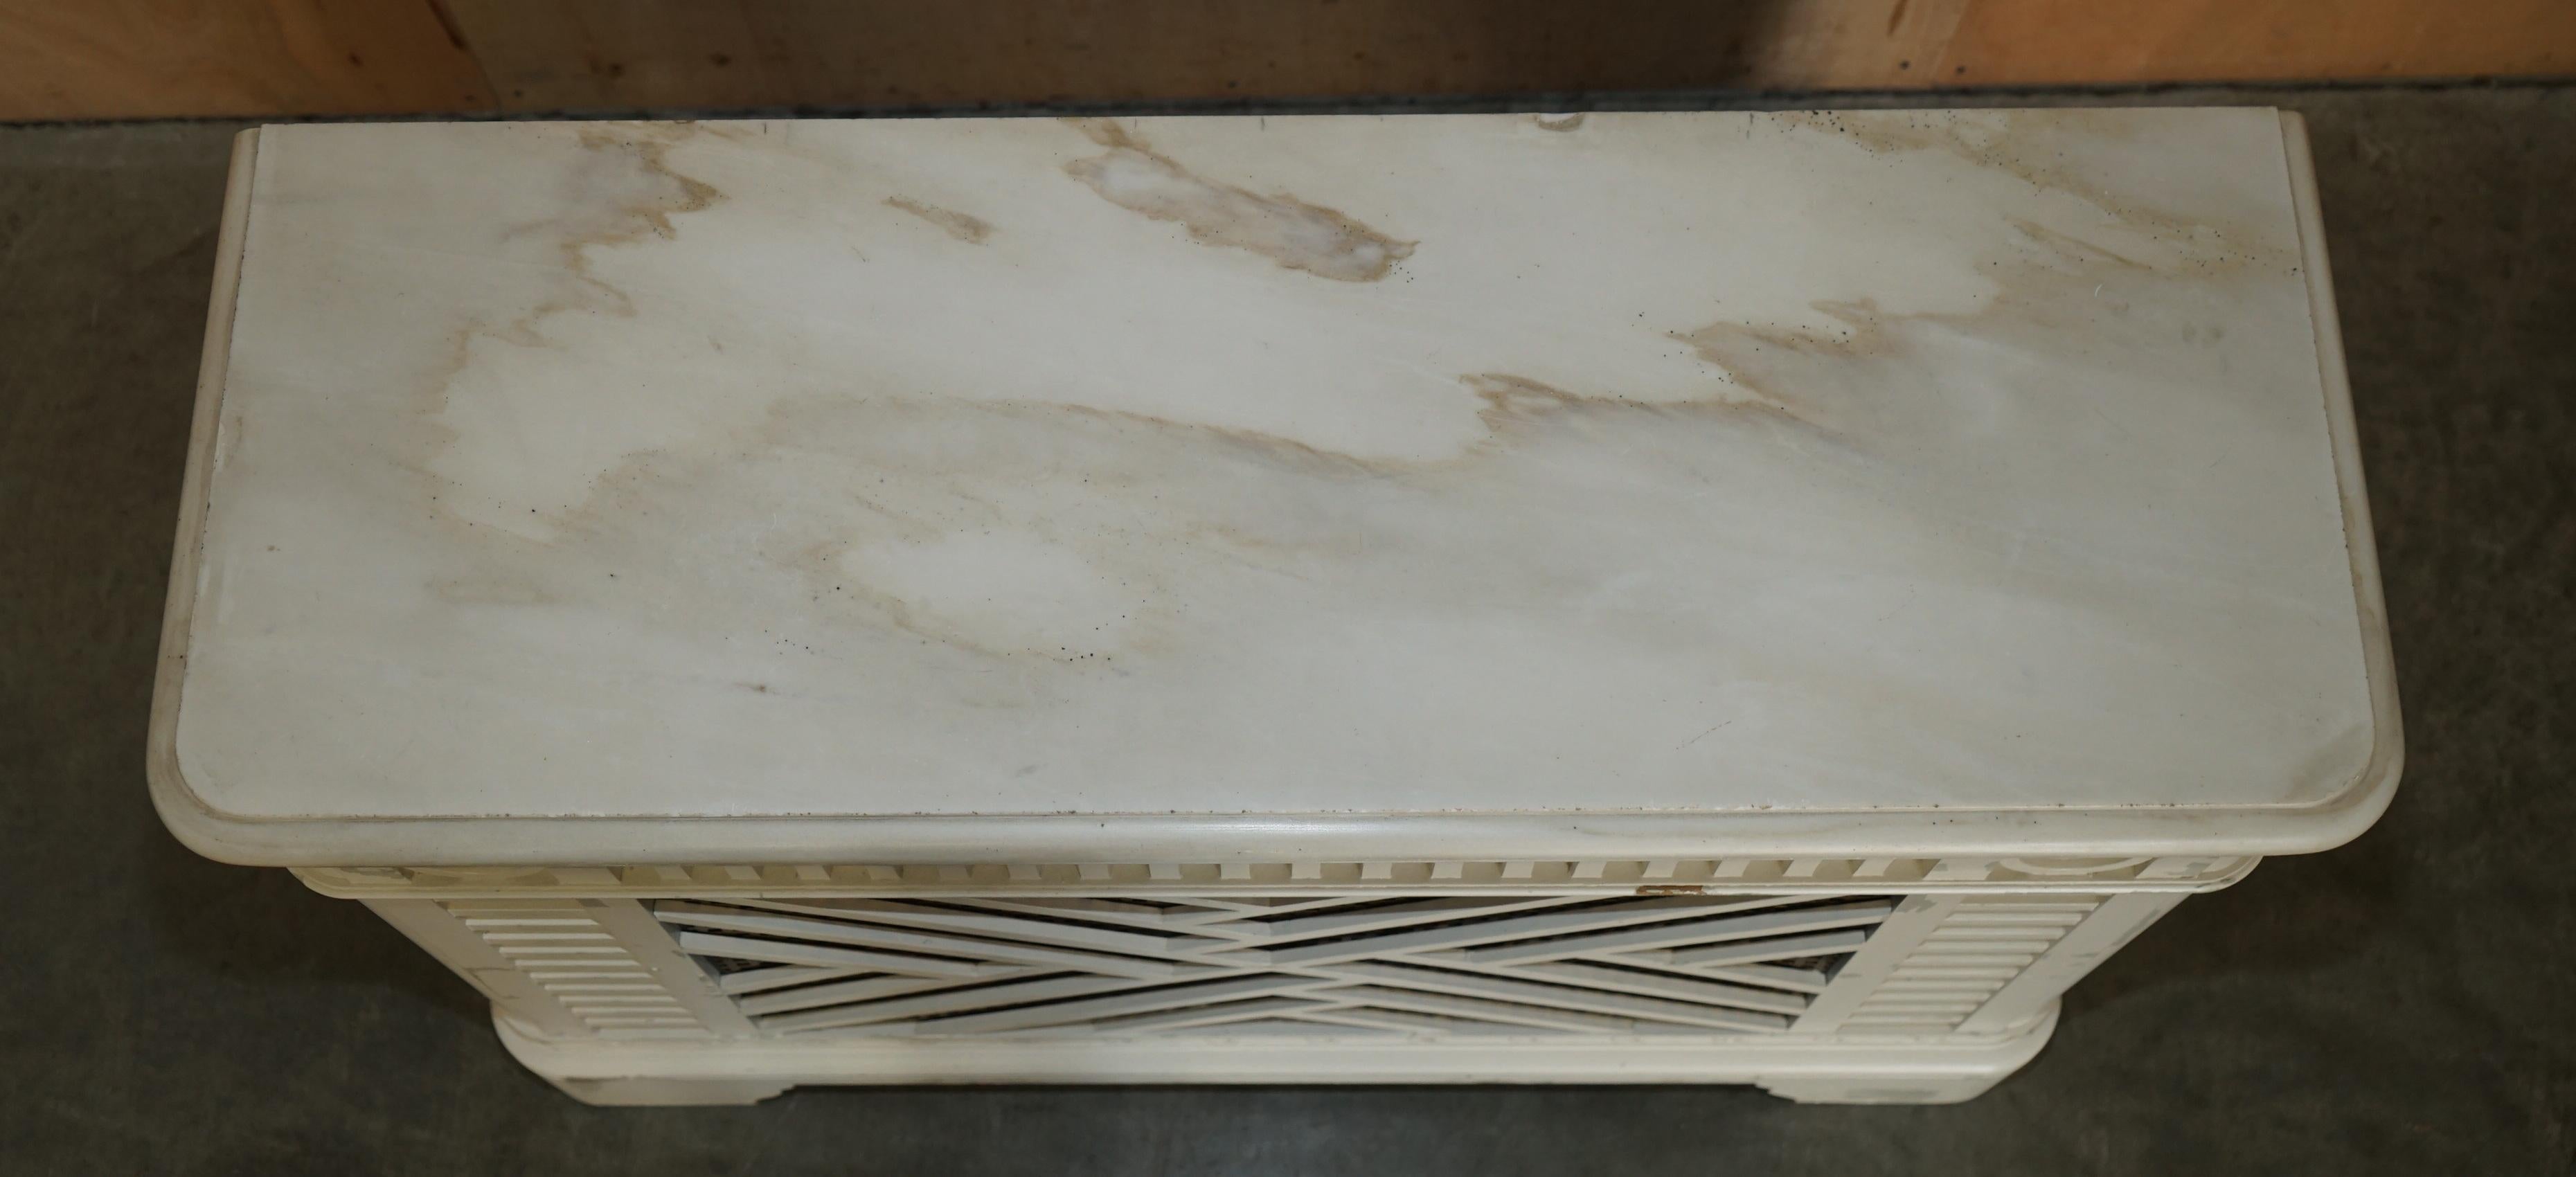 PAIR OF ViNTAGE ITALIAN CARRARA MARBLE TOPPED RADIATOR COVERS REMOVABLE FRONTS For Sale 8